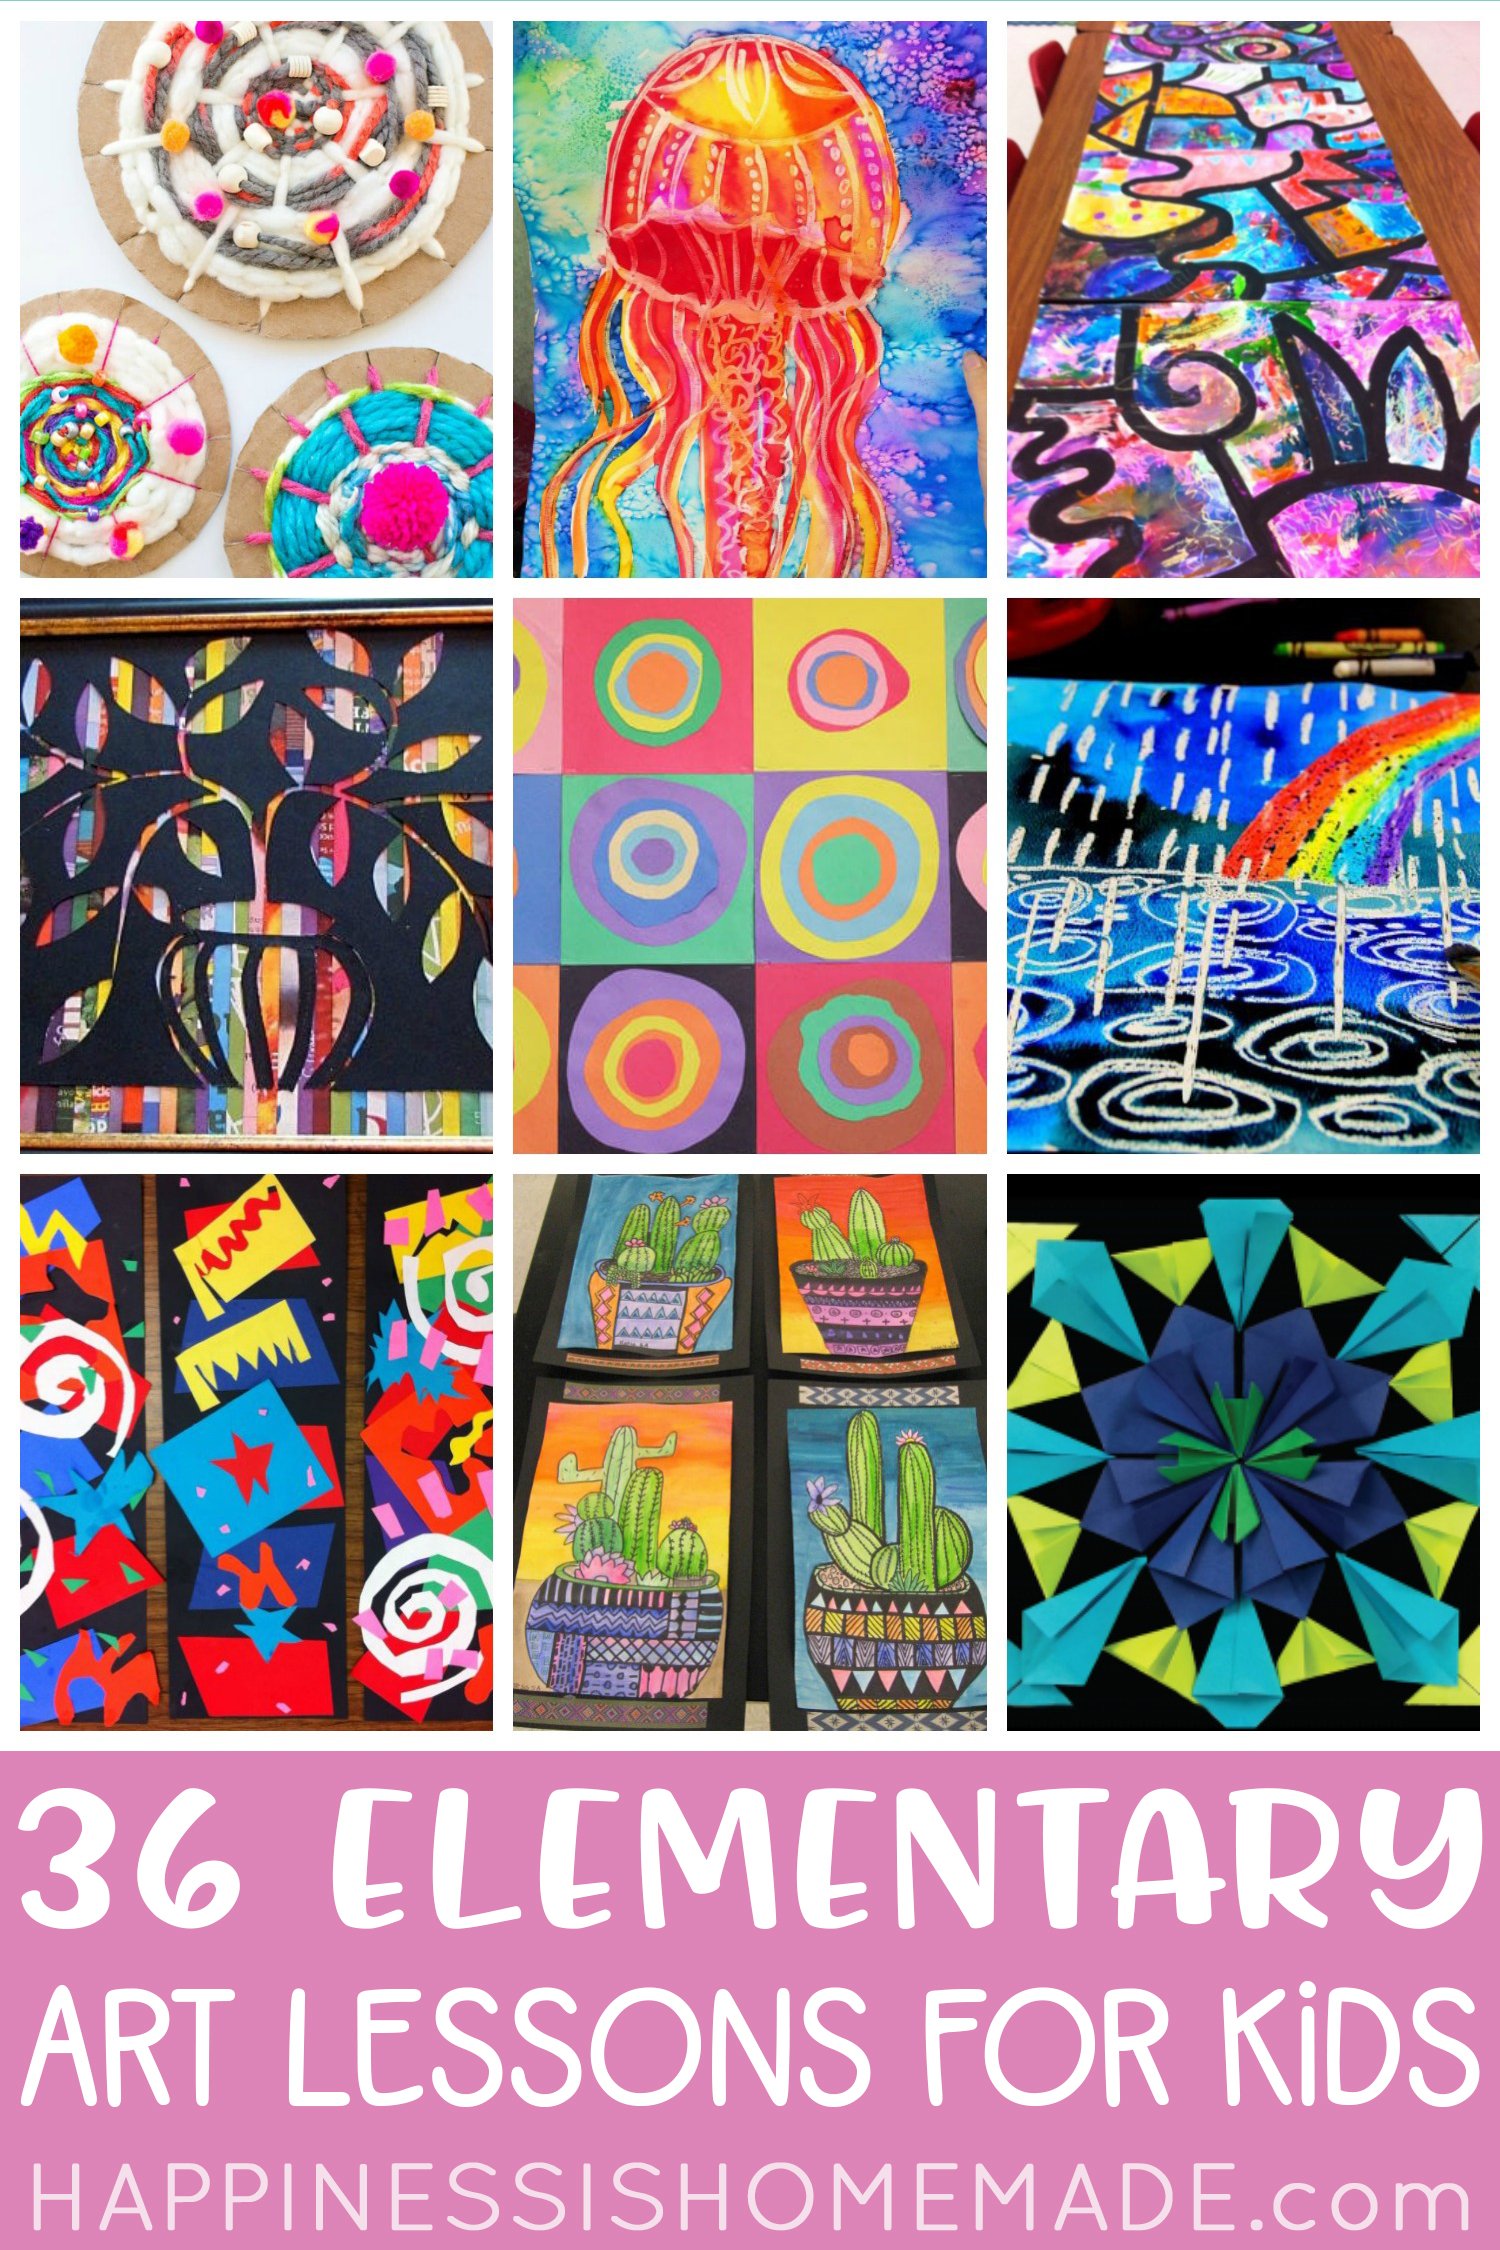 36 elementary art lessons for kids pin graphic